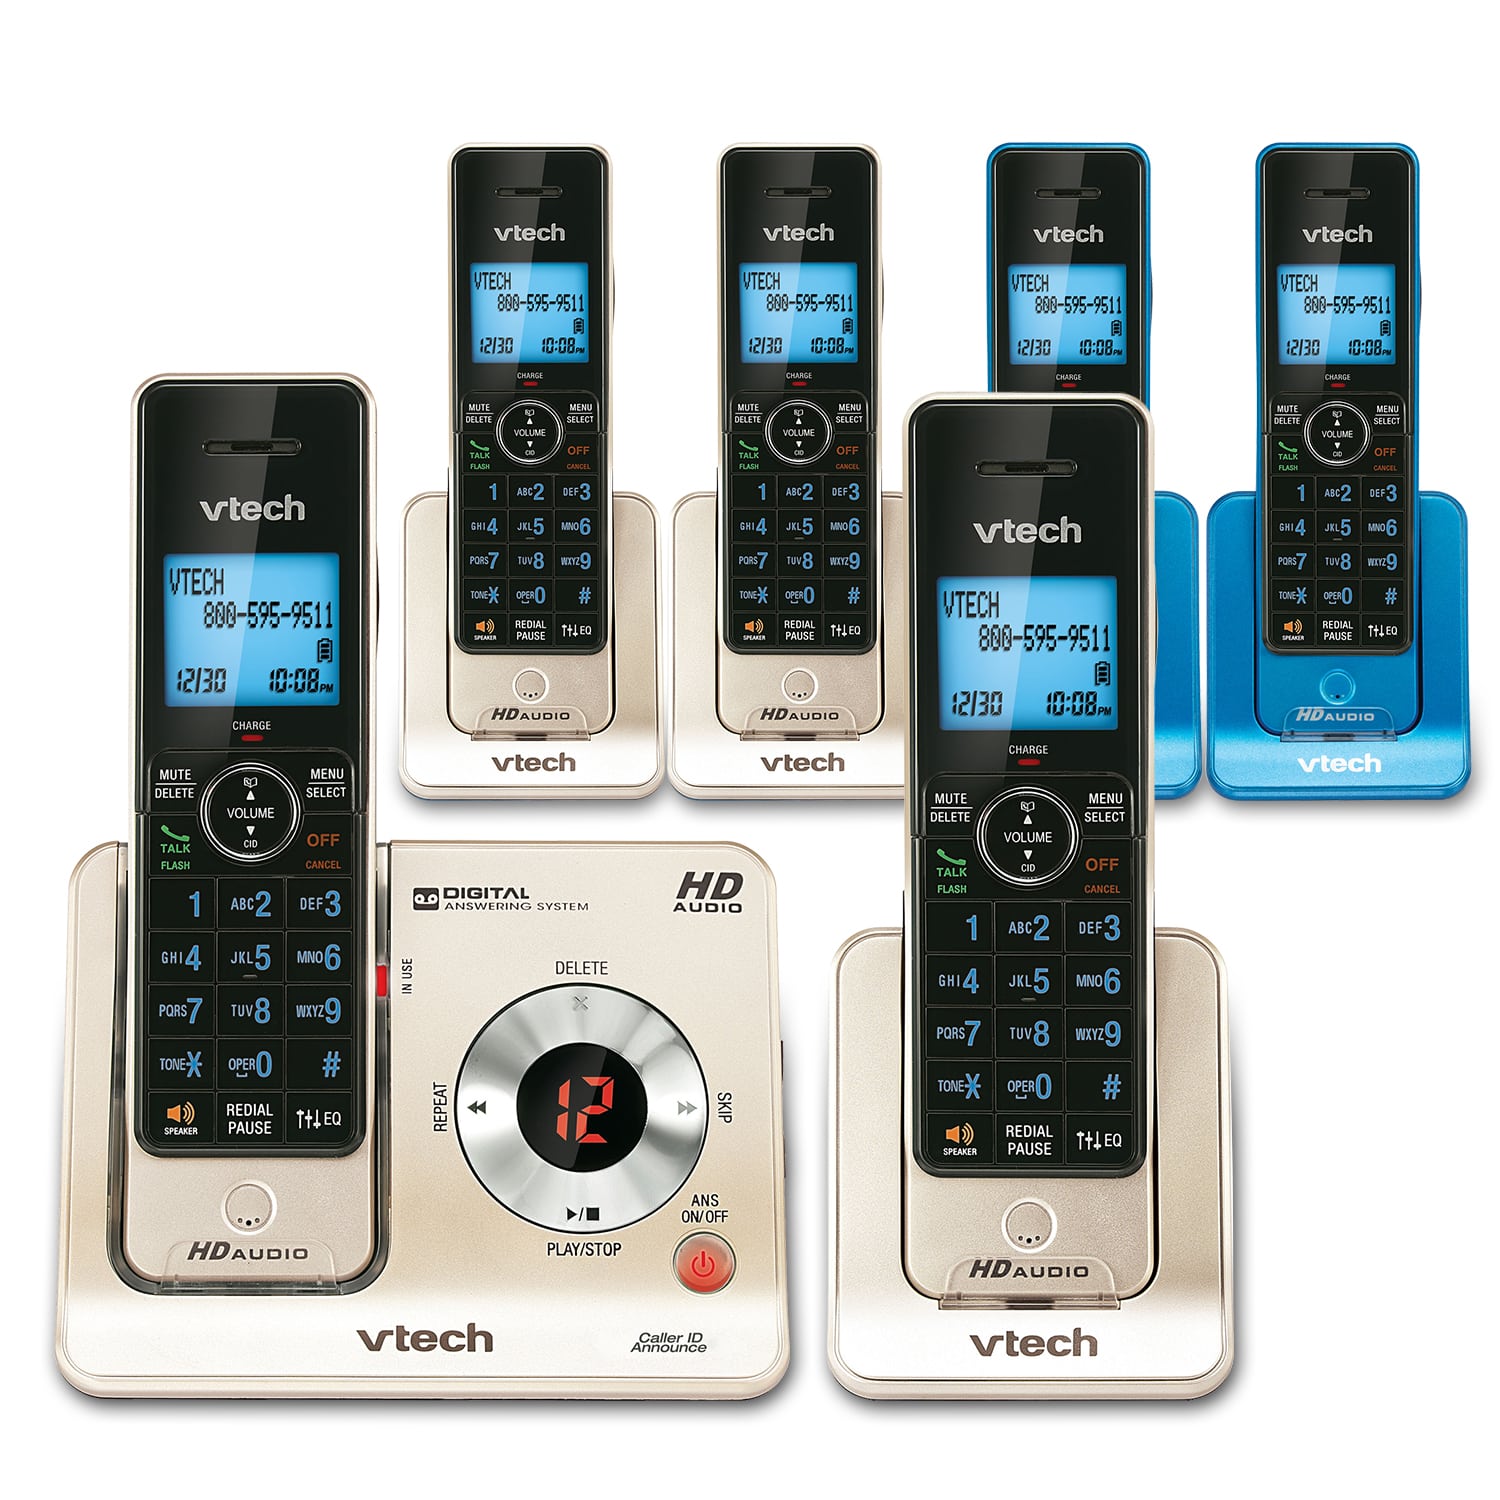 6 Handset Phone System with Caller ID/Call Waiting - view 1